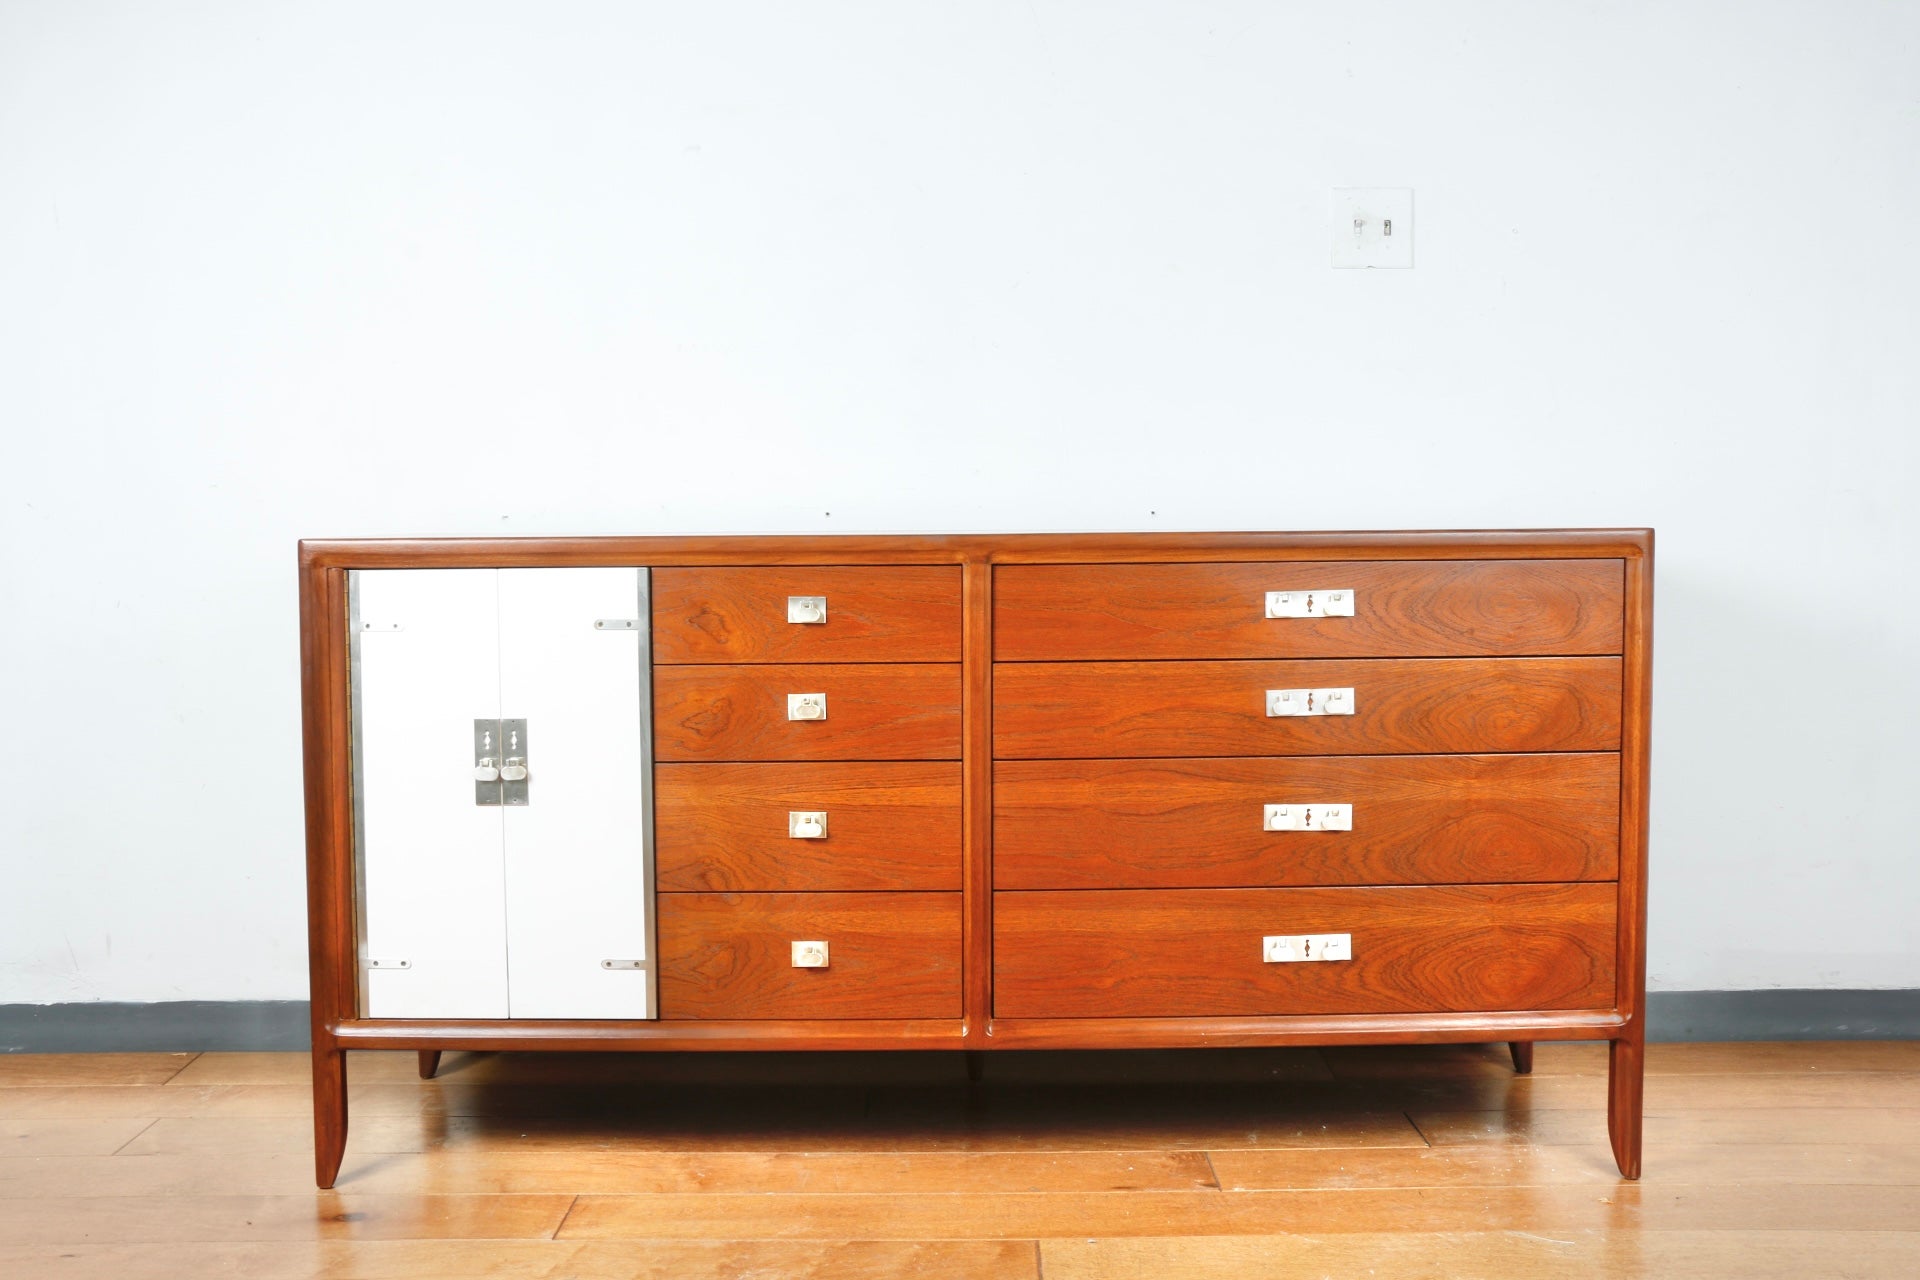 Vintage mid-century refinished credenza with painted white doors. Yea defect size with working drawers. Chrome accent. Hardware. Lots of storage space.